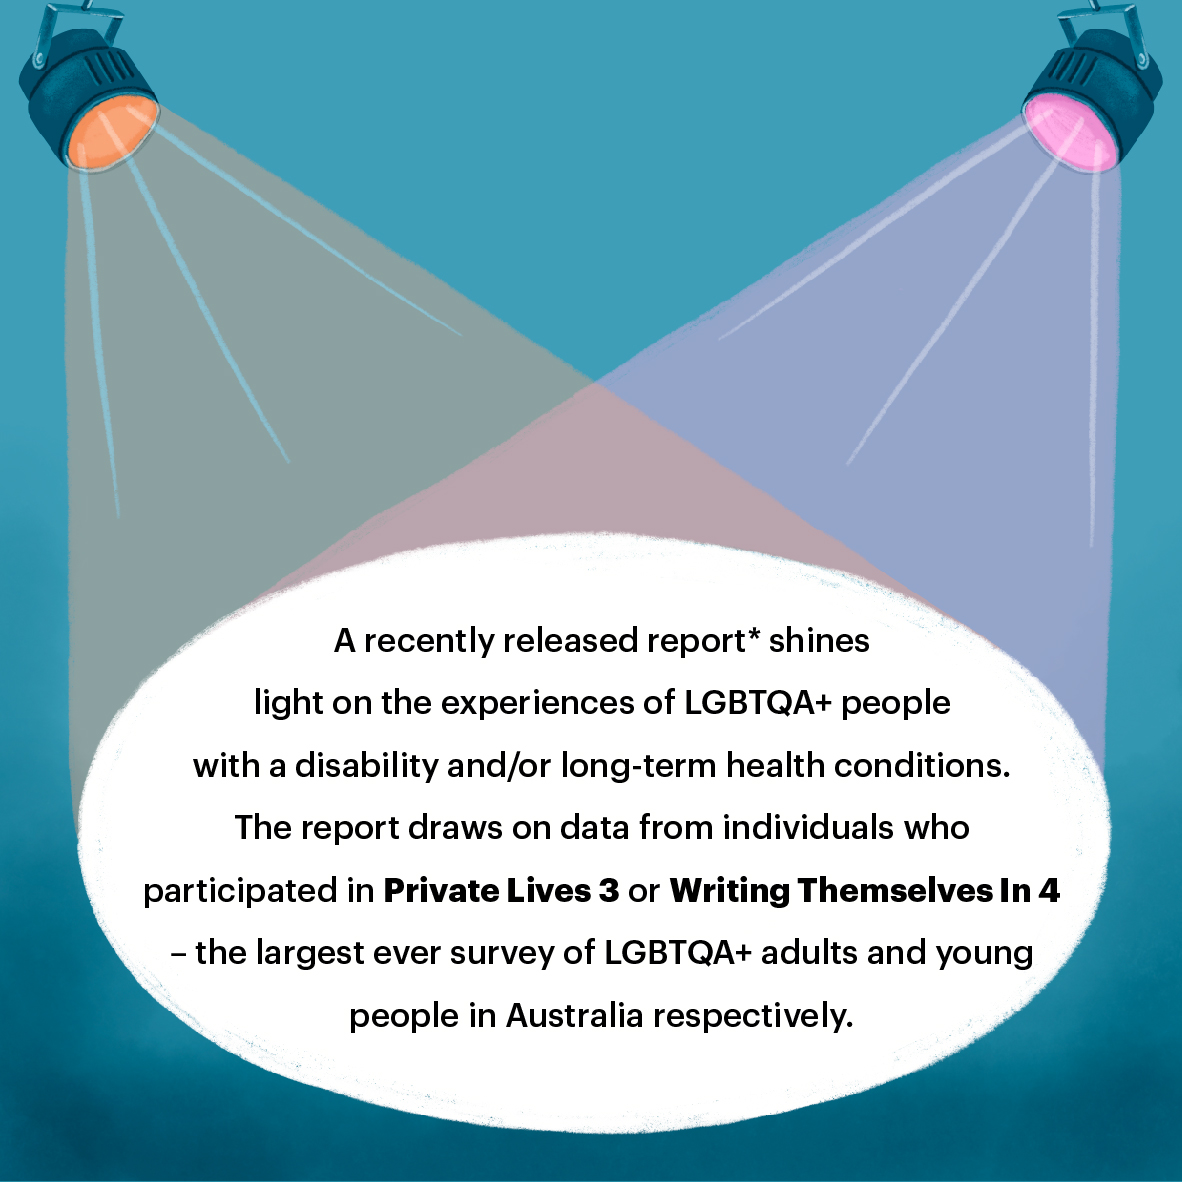 Illustration of two spotlights focused on area of text. Text reads: A recently released report* shines light on the experiences of LGBTQA+ people with a disability and/or long-term health conditions. The report draws on data from individuals who participated in
Private Lives 3 or Writing Themselves In 4 – the largest ever survey of LGBTQA+ adults and young people in Australia respectively. 